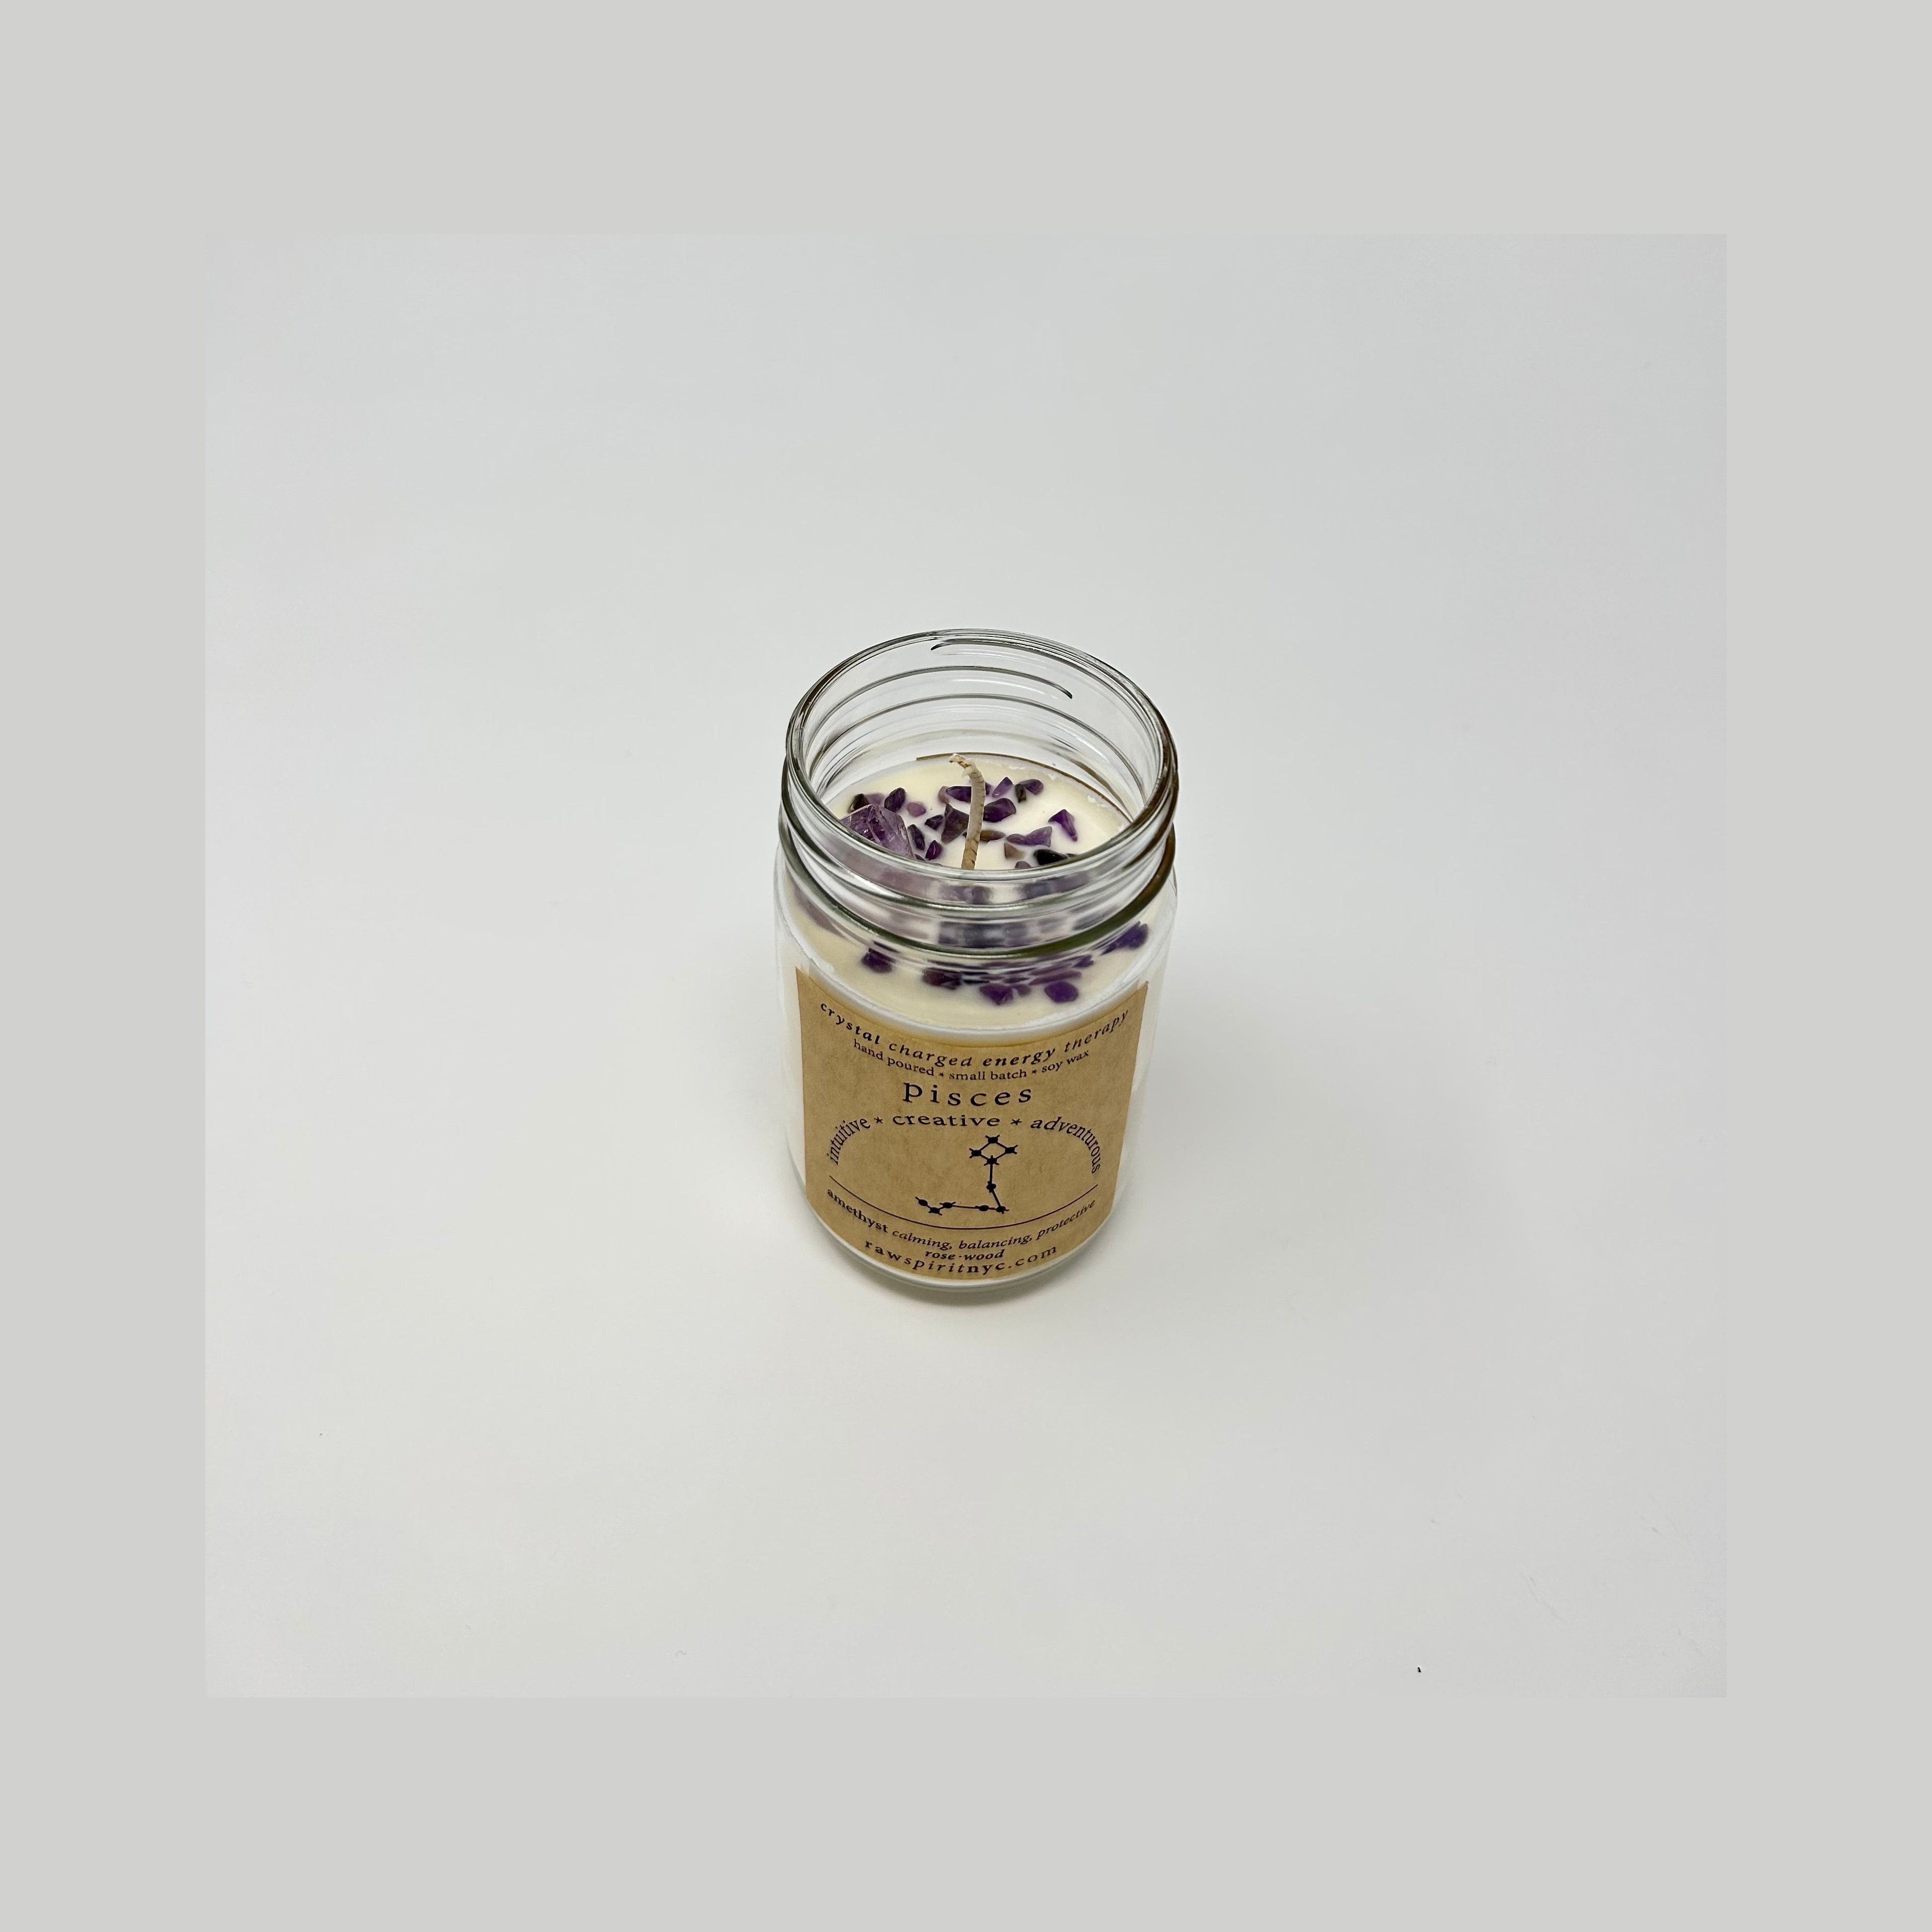 Pisces - Crystal Charged Energy Candle